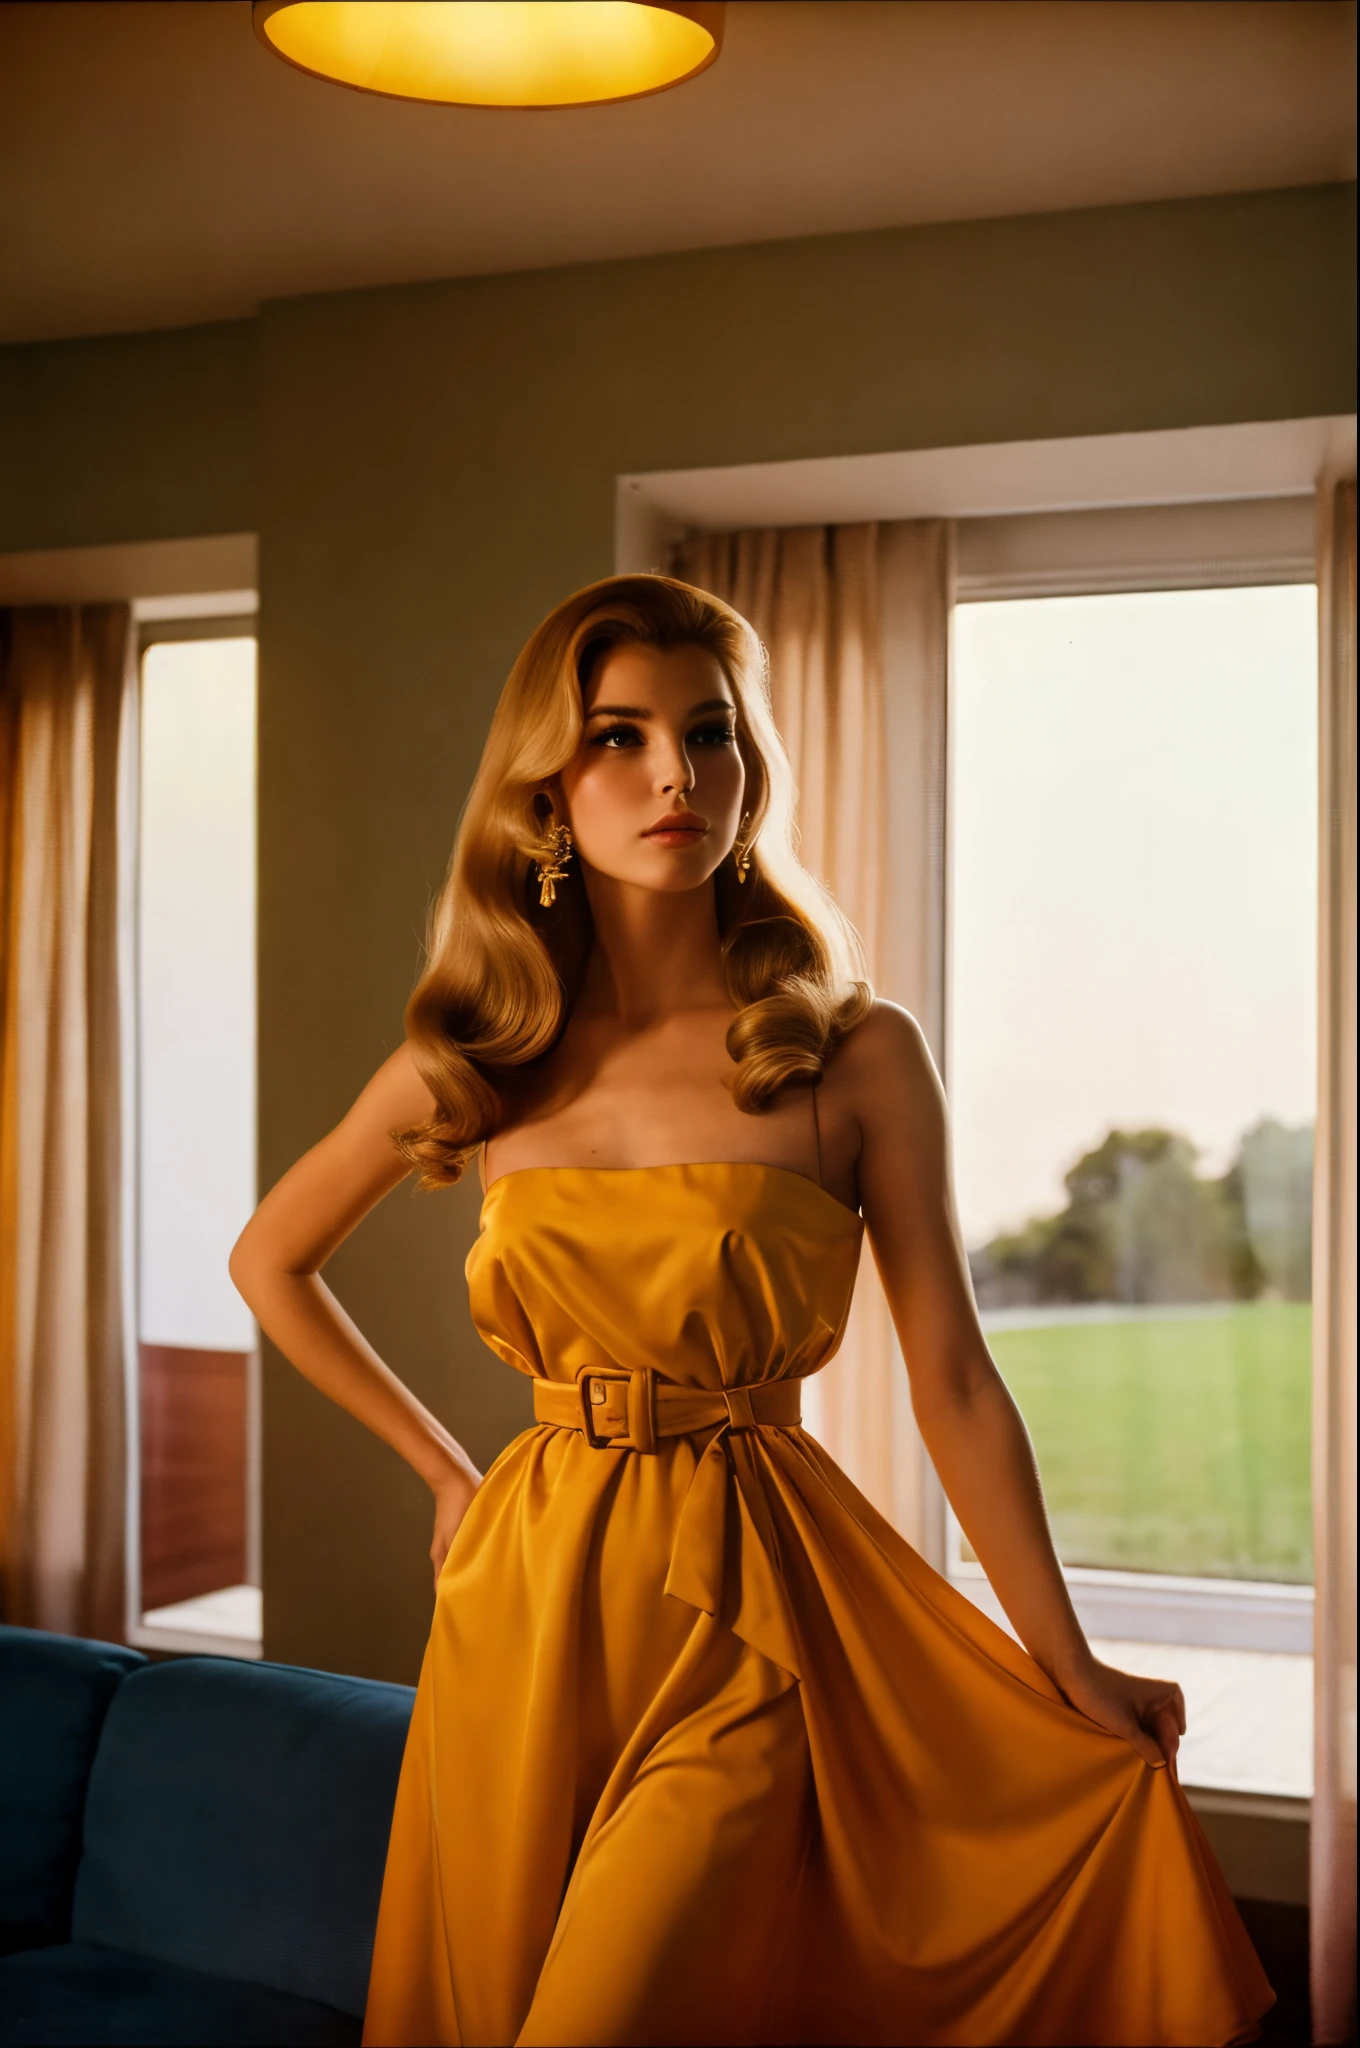 Full shot, a beautiful honey blonde wearing a vintage 1960s dress and belt, SixtiesHighFashion, 1960s hairstyle, medium breasts, not exposed, pushing a vacuum in a living room in a 1960s home, looking away from viewer, beautiful view out the windows, 8 k sensual lighting, warm lighting, 4k extremely photorealistic, uhd 4k highly detailed